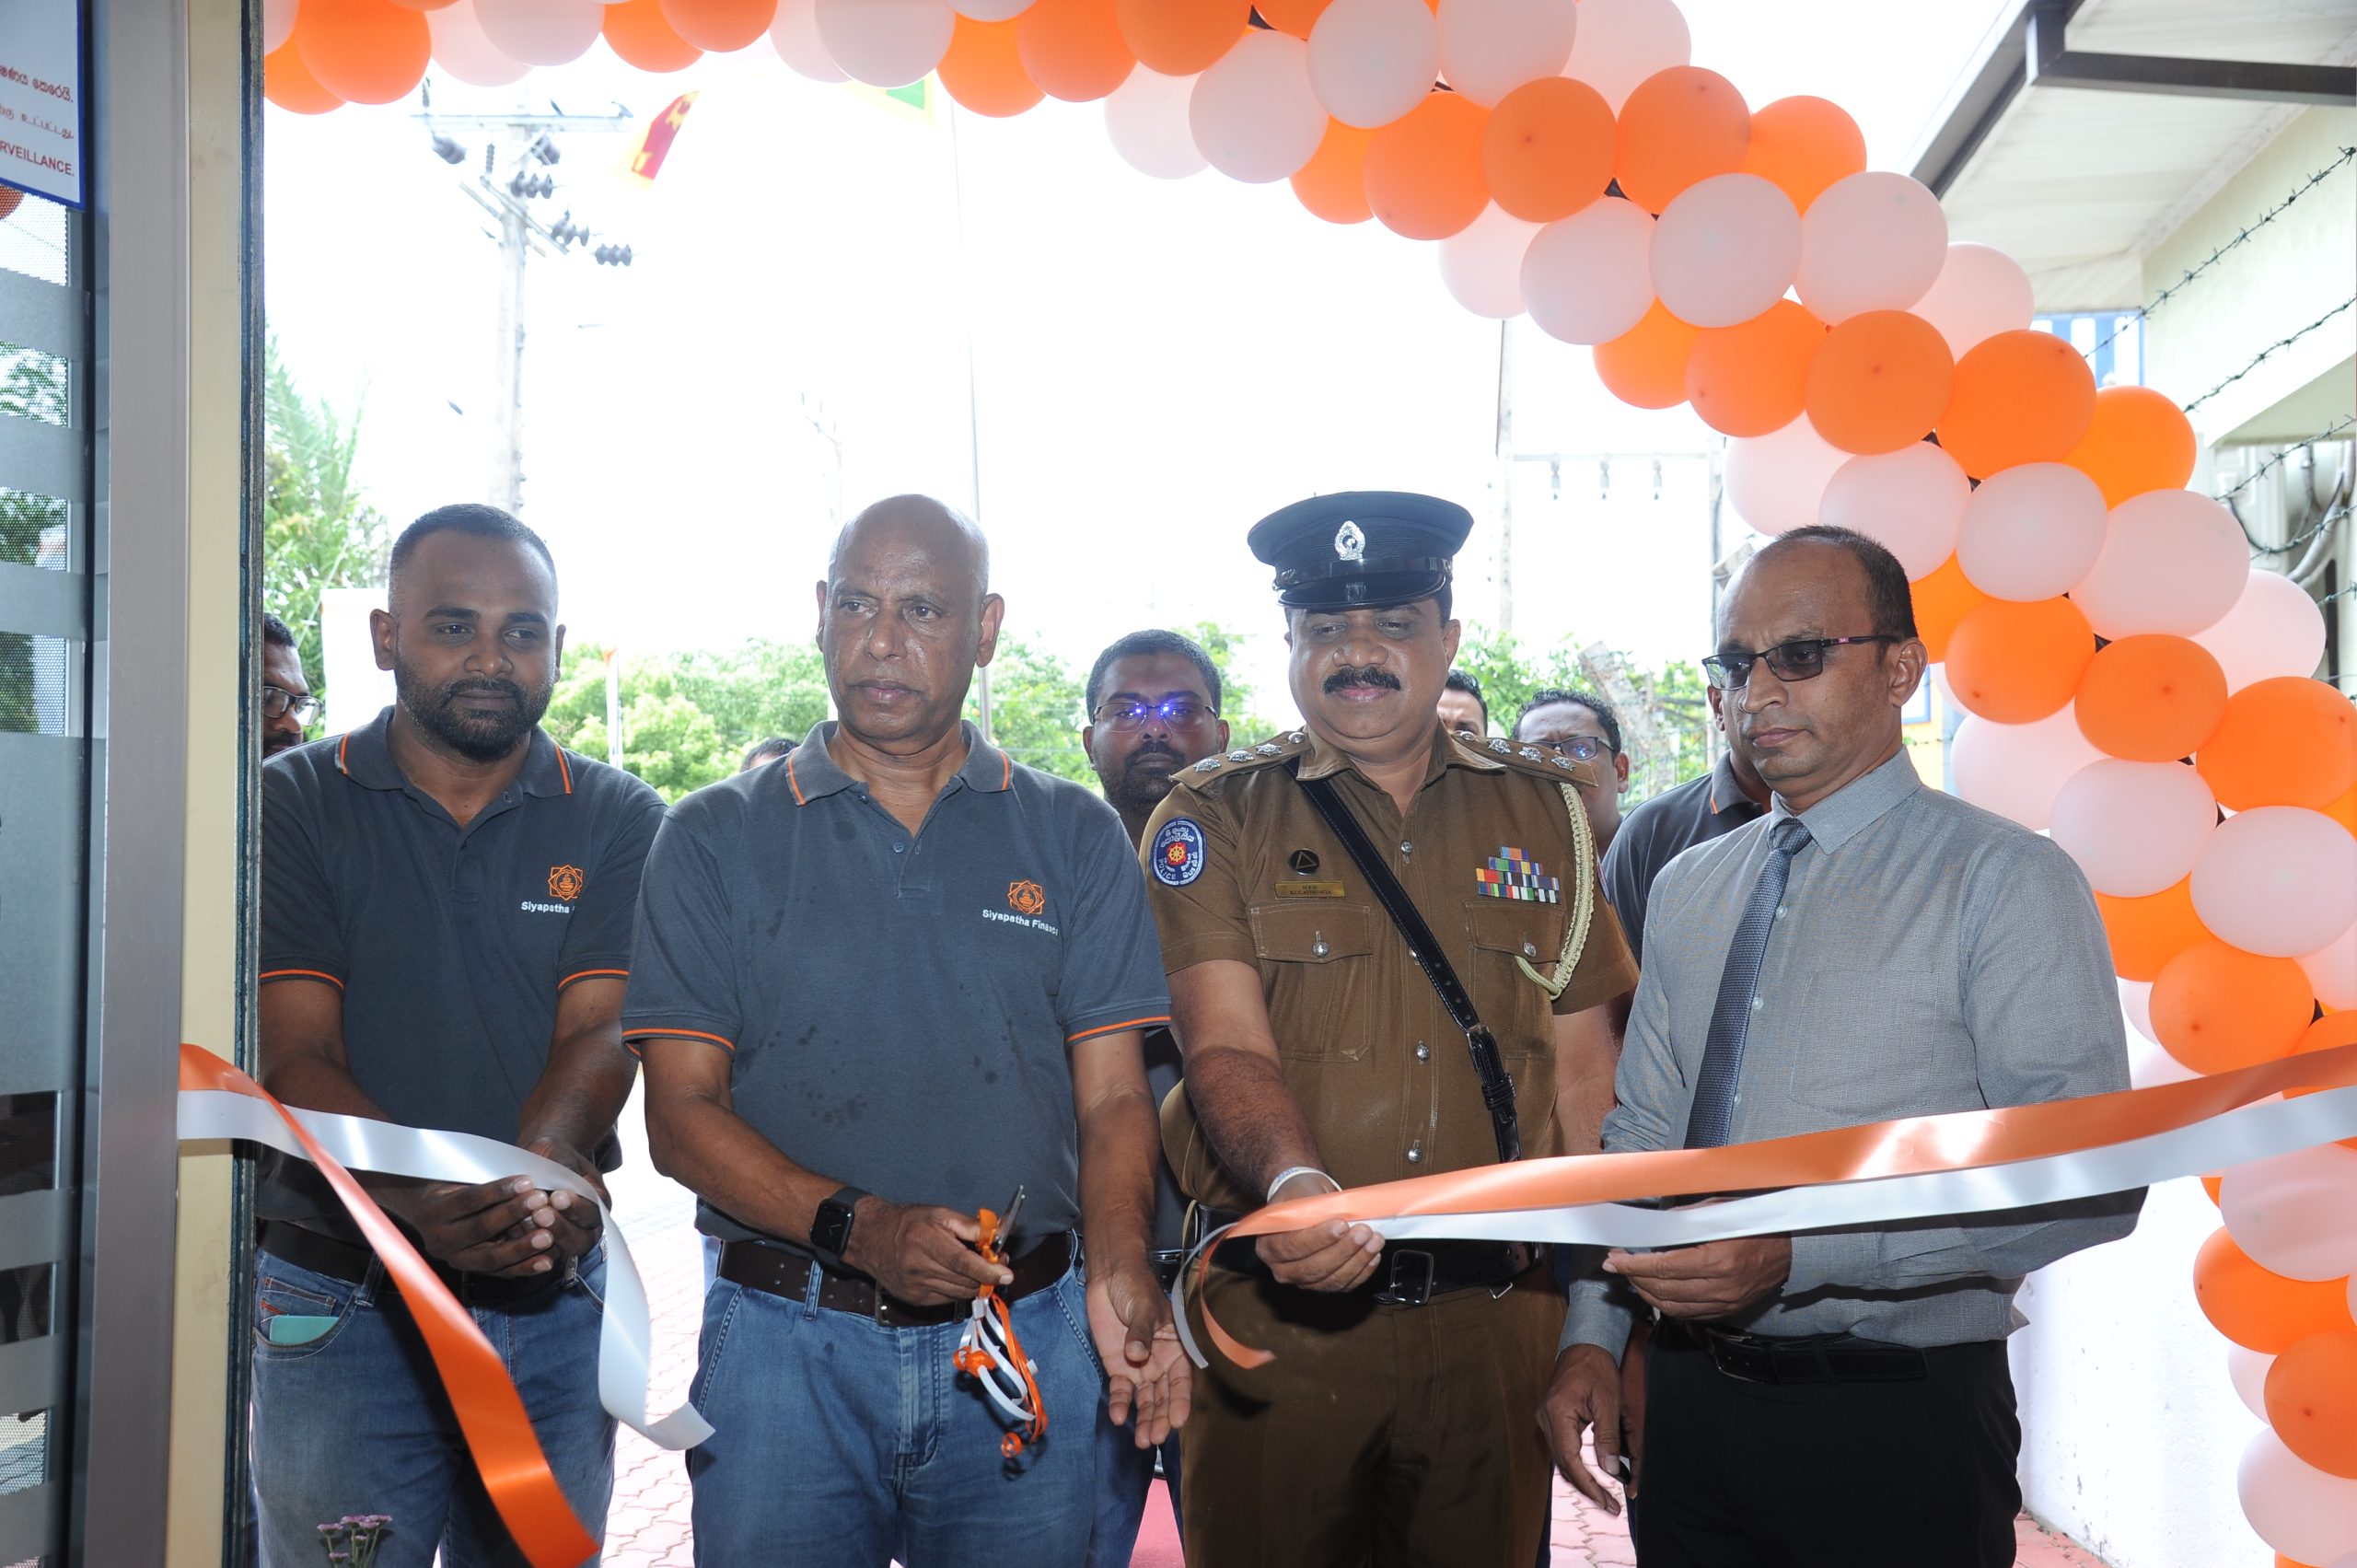 Siyapatha Finance expands its reach with the opening of its latest branch in Puttalam